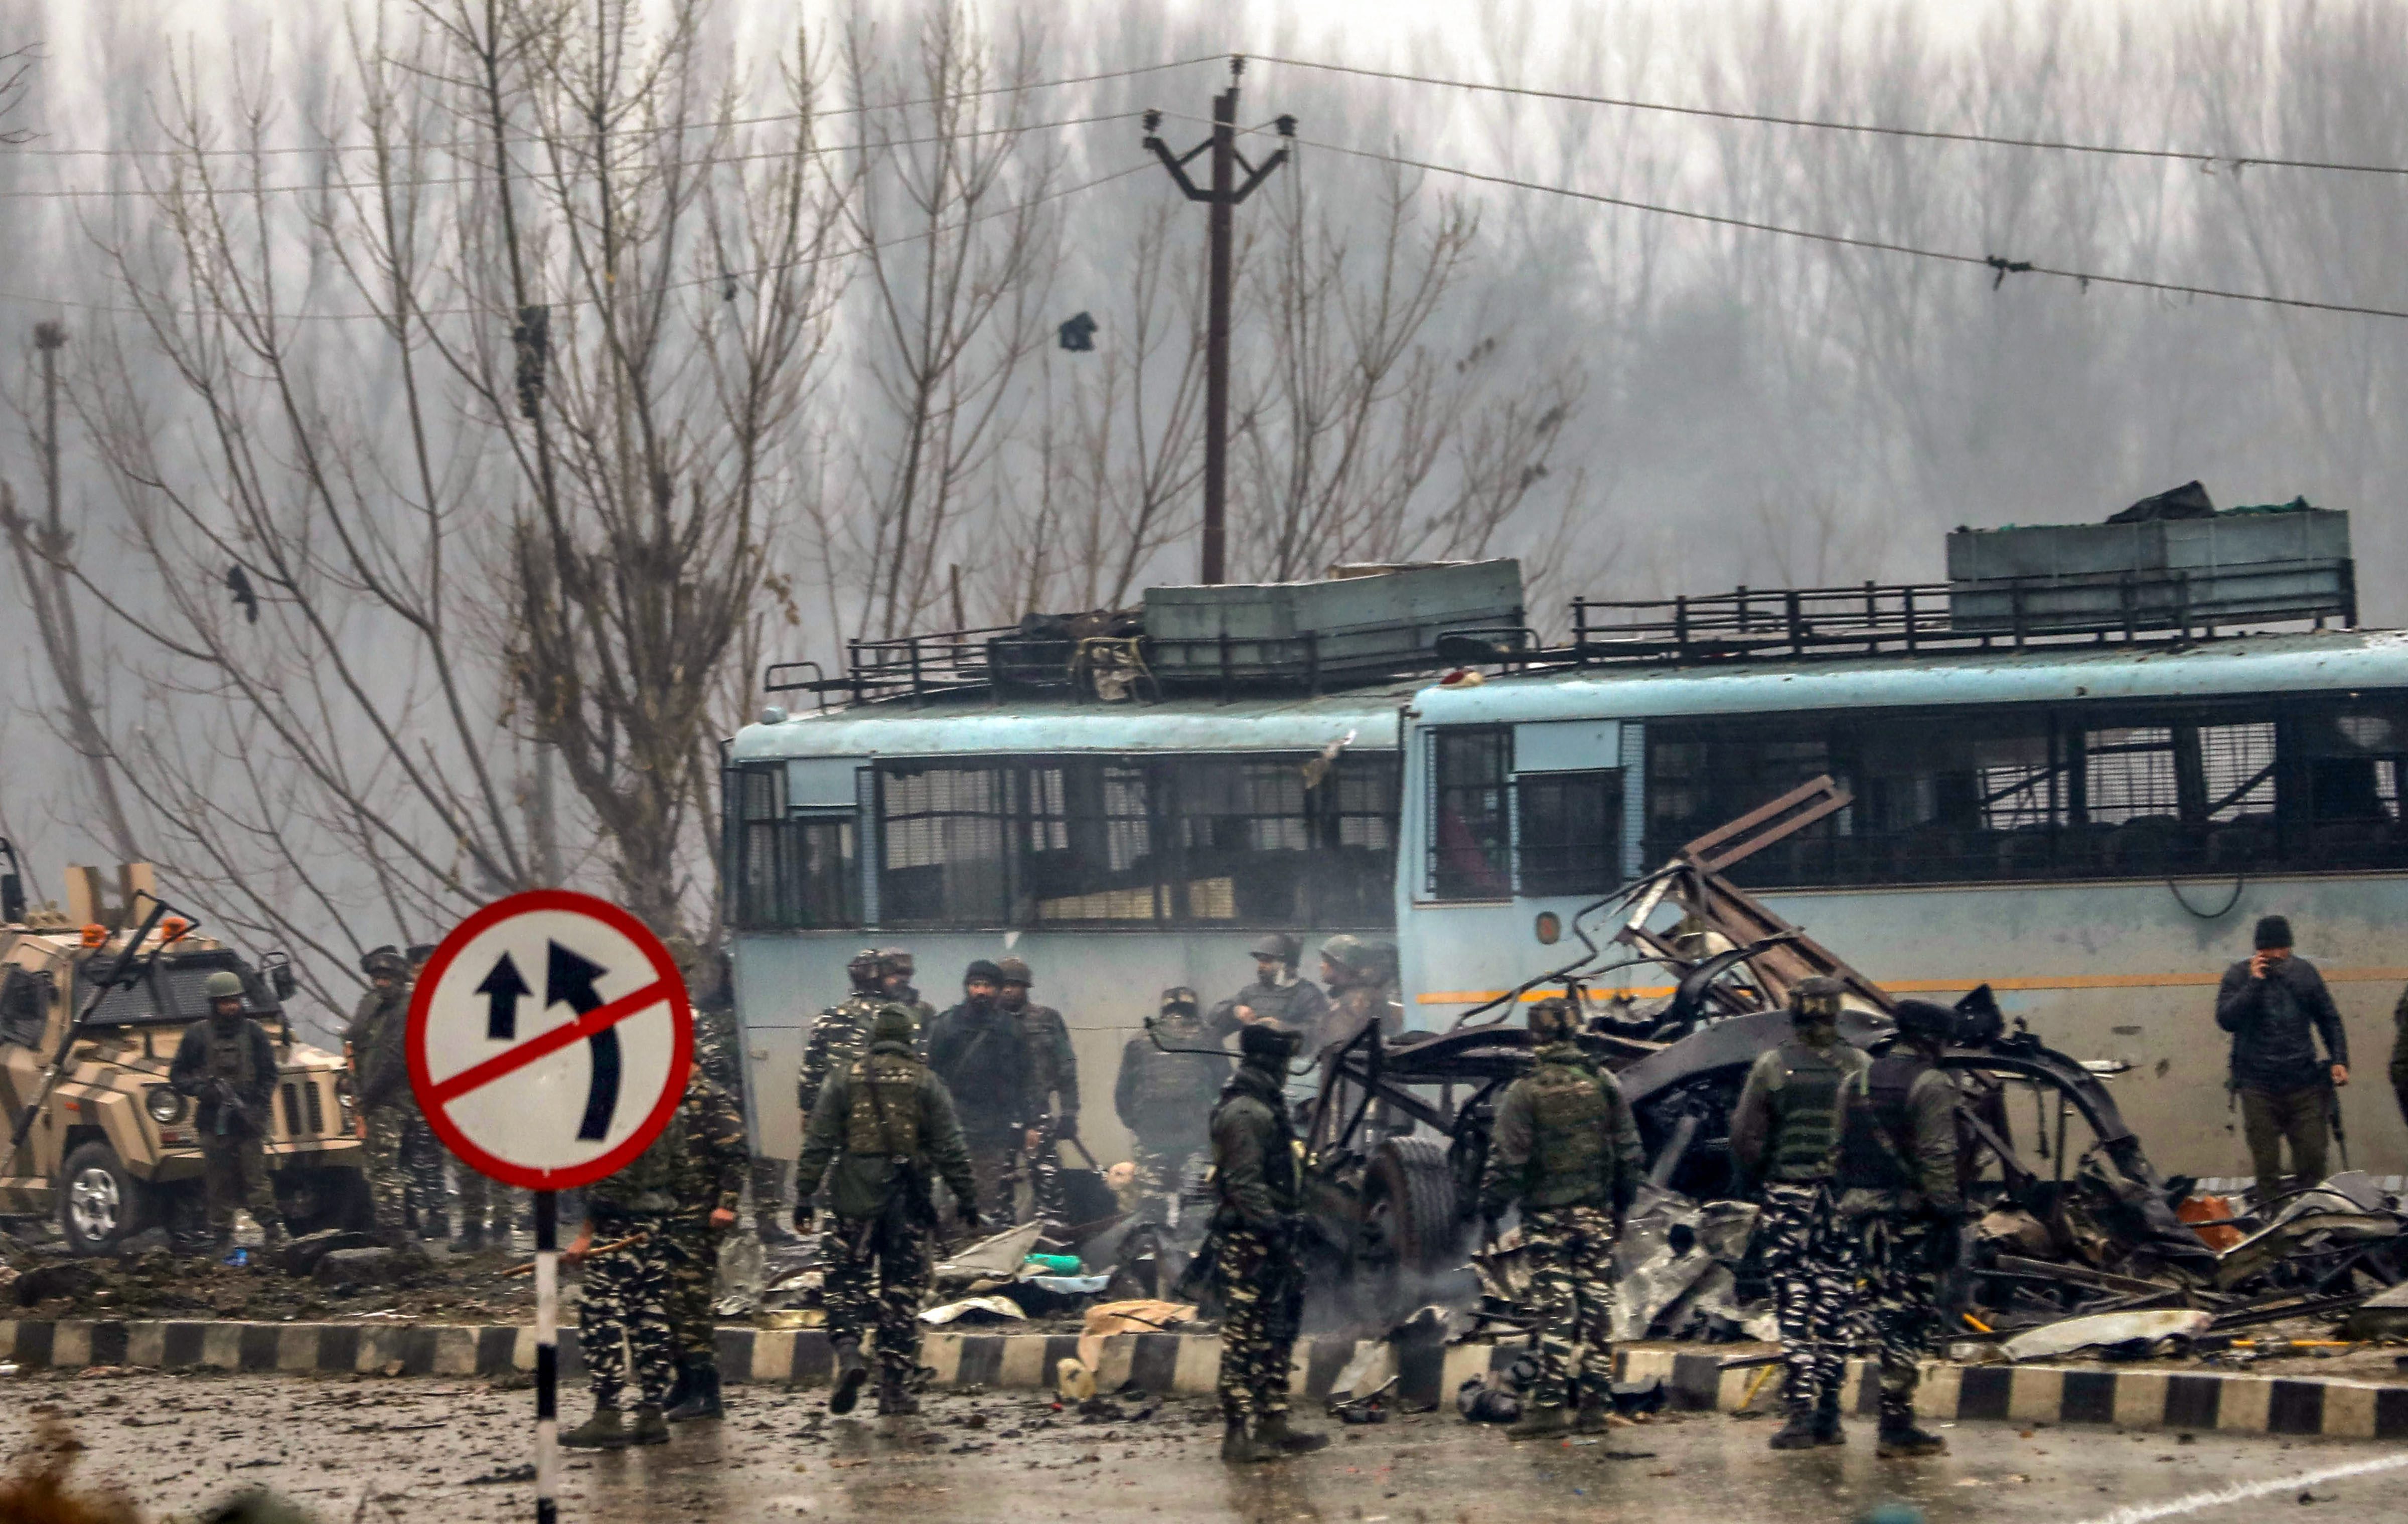 Pulwama chargesheet: 350 voice samples, ₹10 lakh and Pak hand written all over it